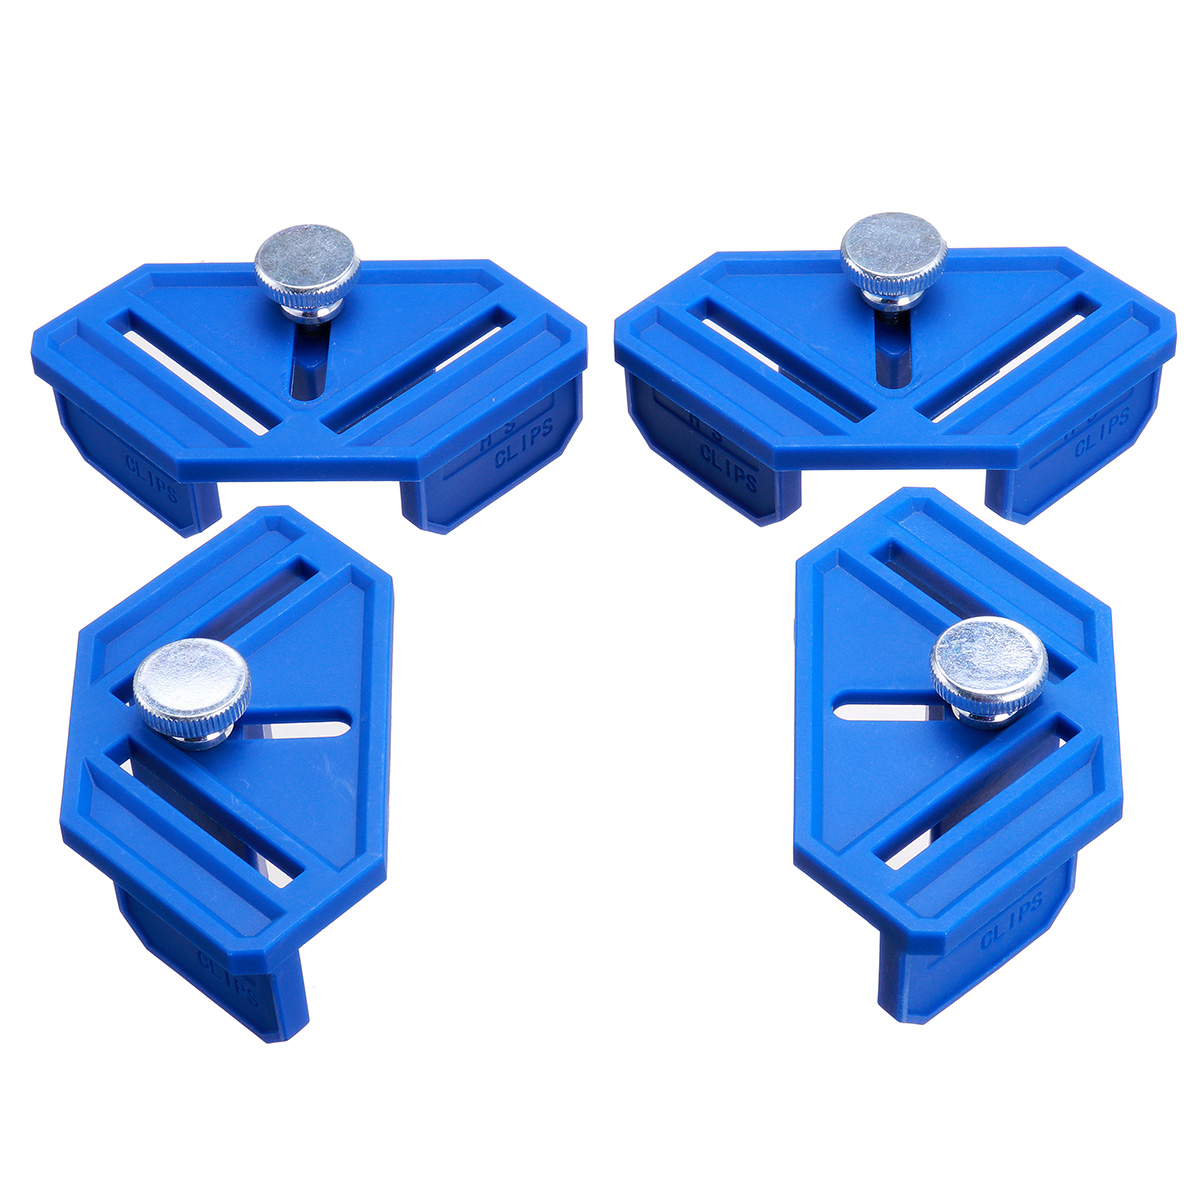 4pcs-Adjustable-Right-Angle-Positioning-Clamp-767642mm-Woodworking-Corner-Clamp-Right-Clips-DIY-Fixt-1889370-4